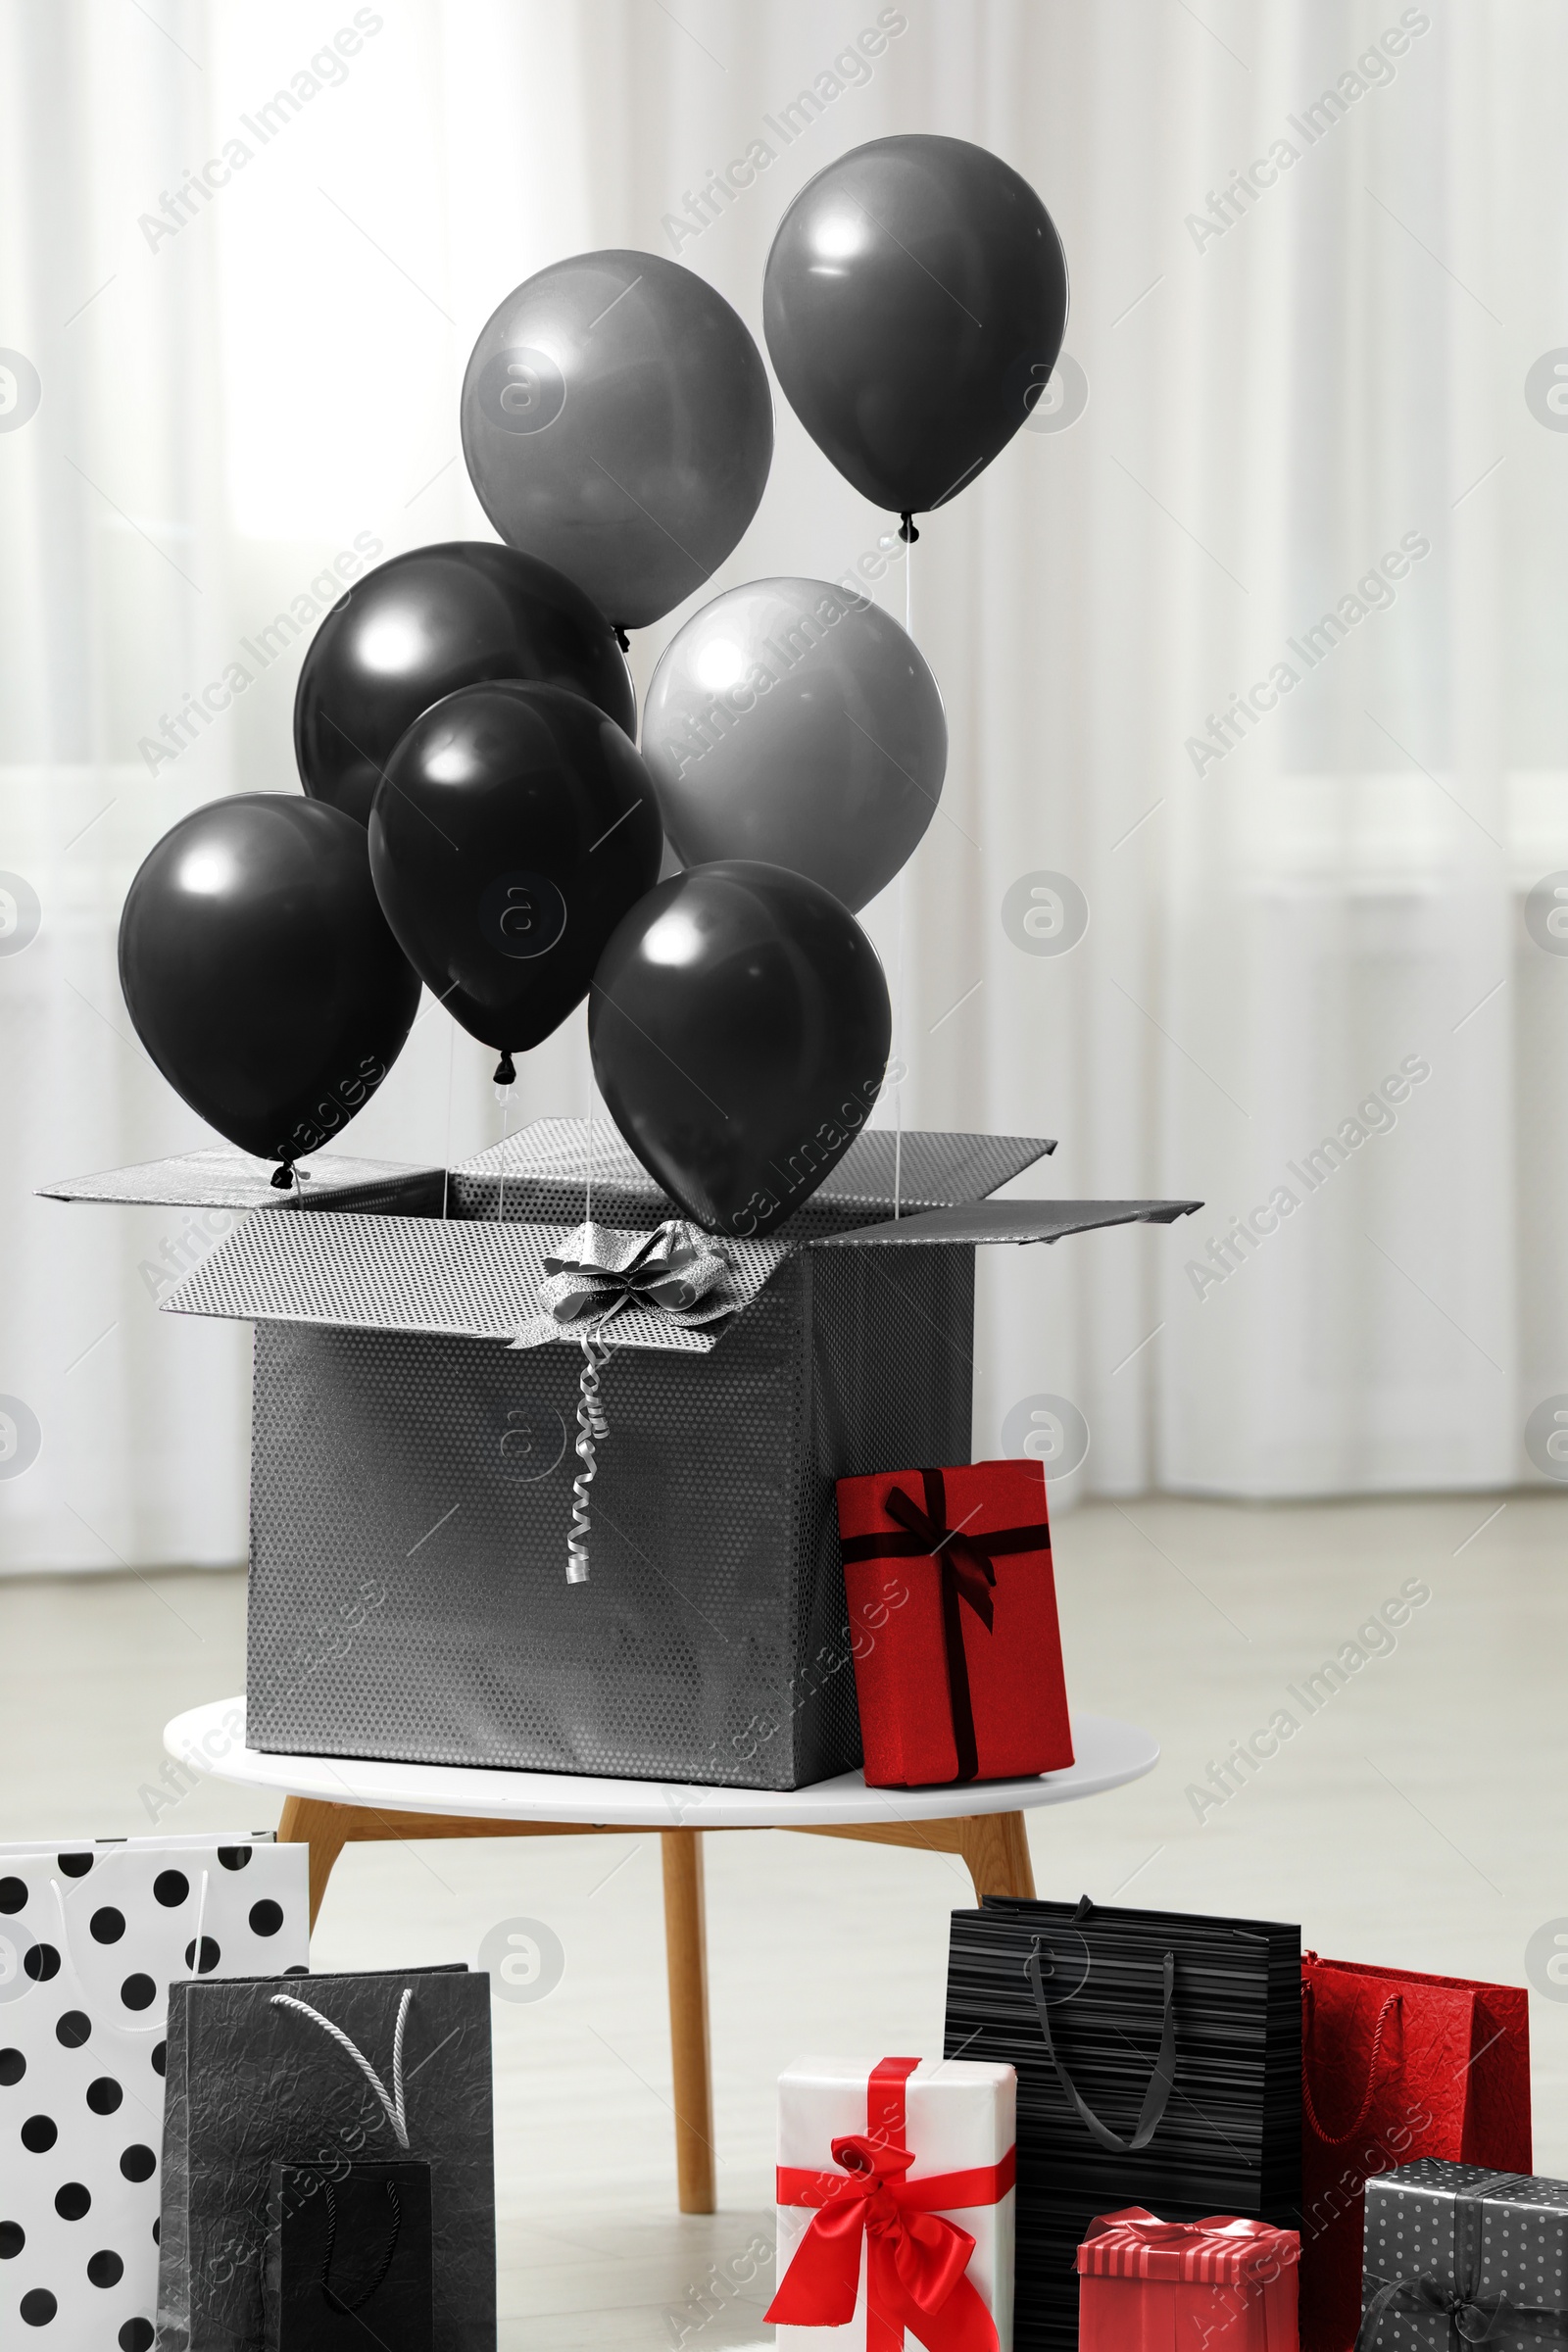 Image of Black Friday concept. Bunch of balloons and shopping bags indoors